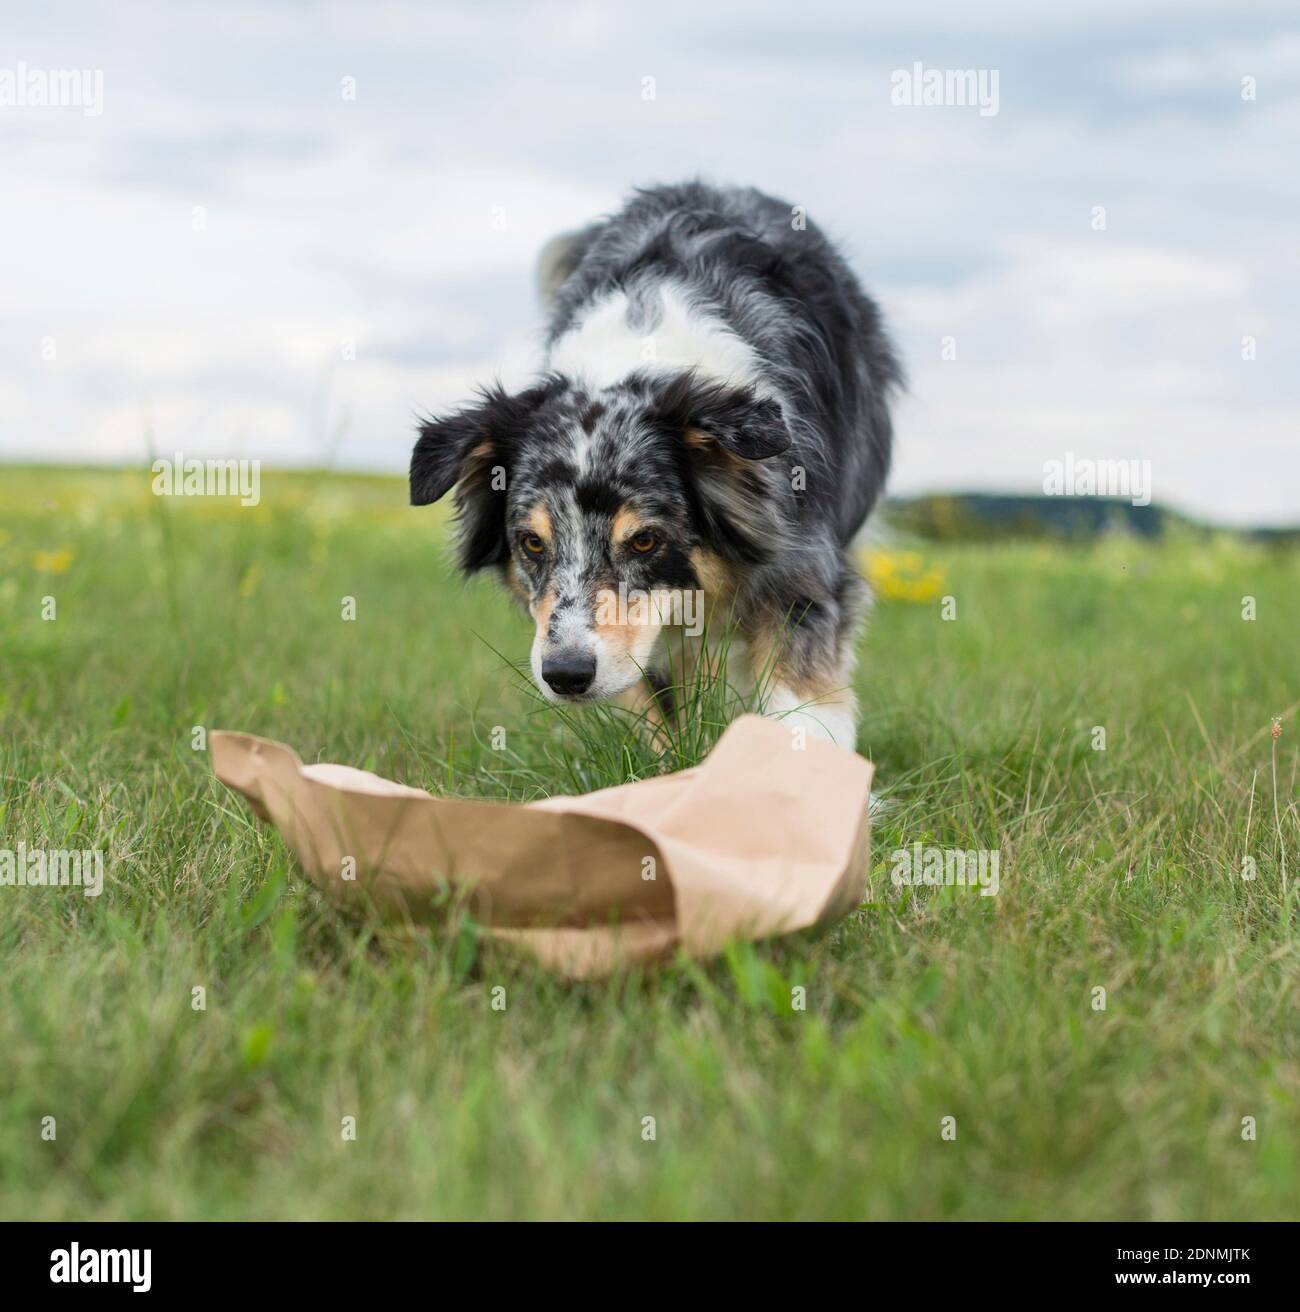 Australian Shepherd. An adult dog runs towards a paper bag that may contain rubbish. Germany Stock Photo